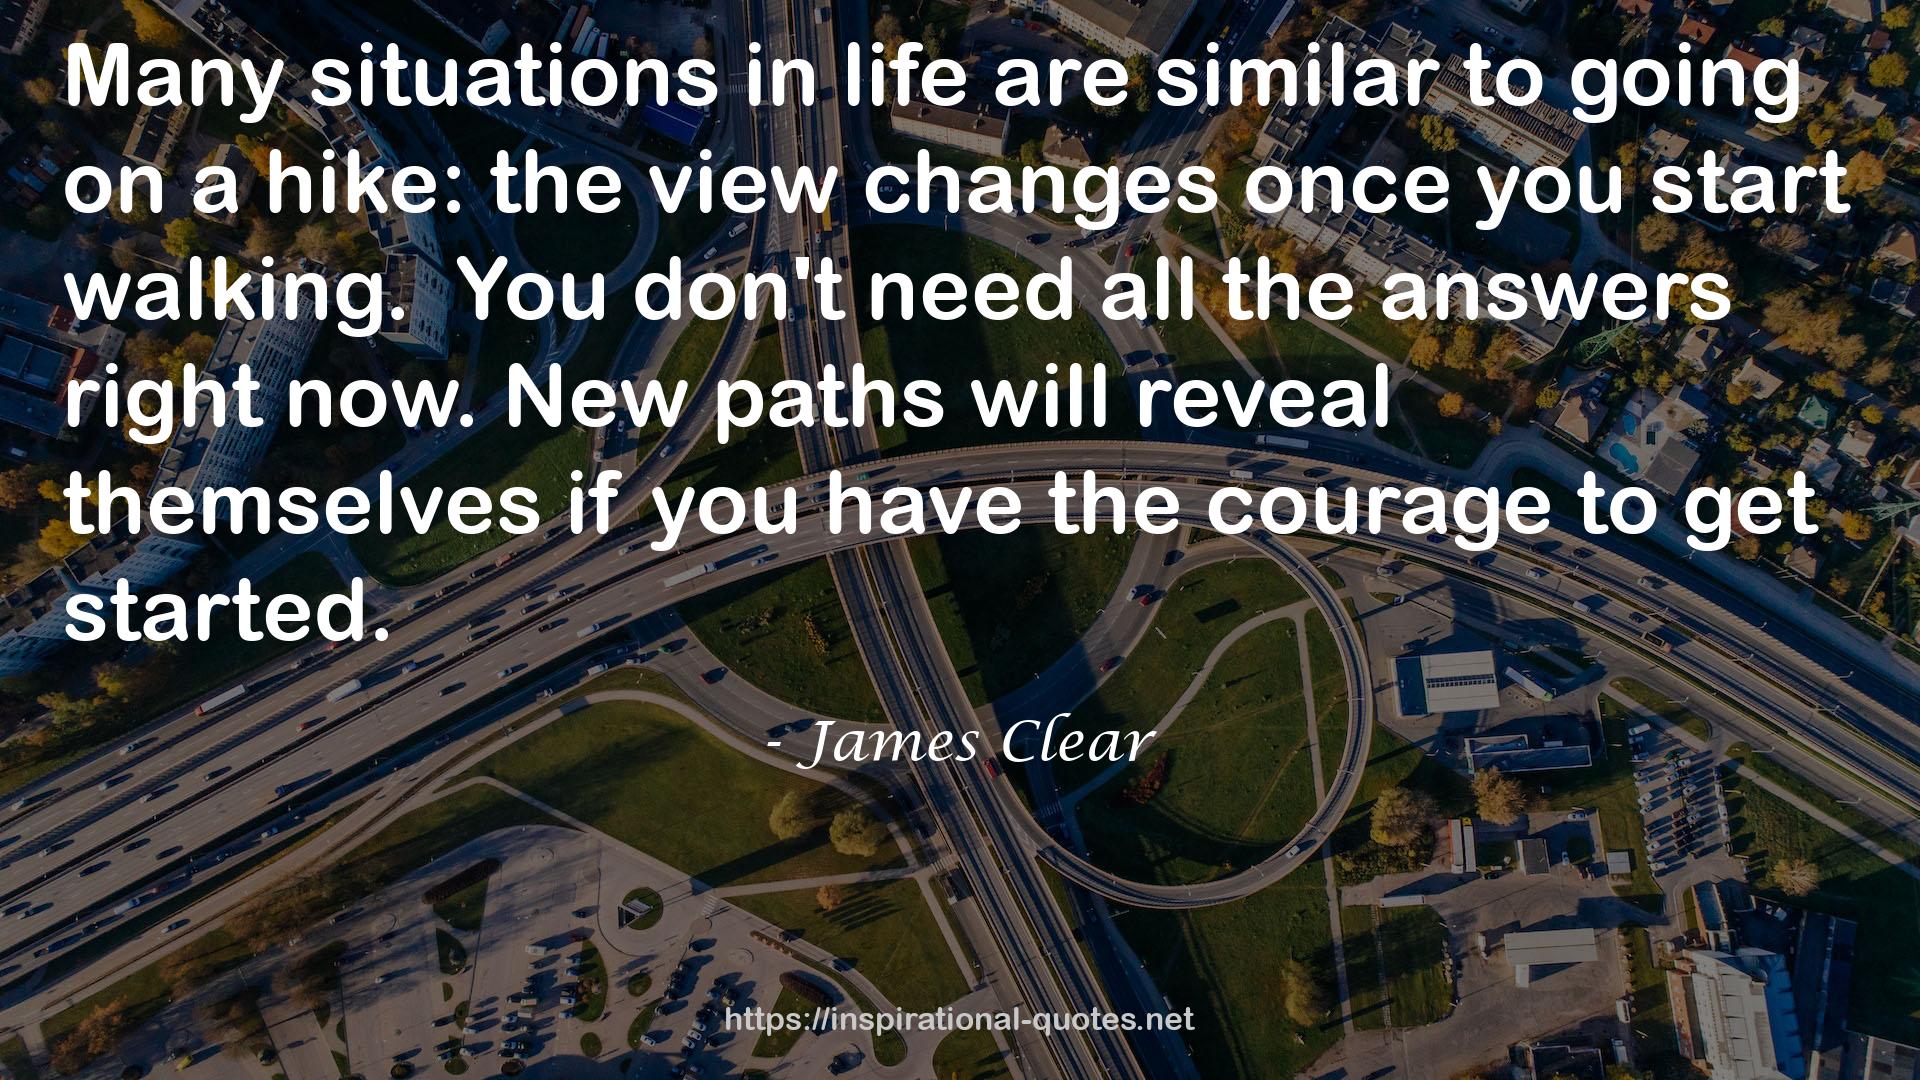 James Clear QUOTES